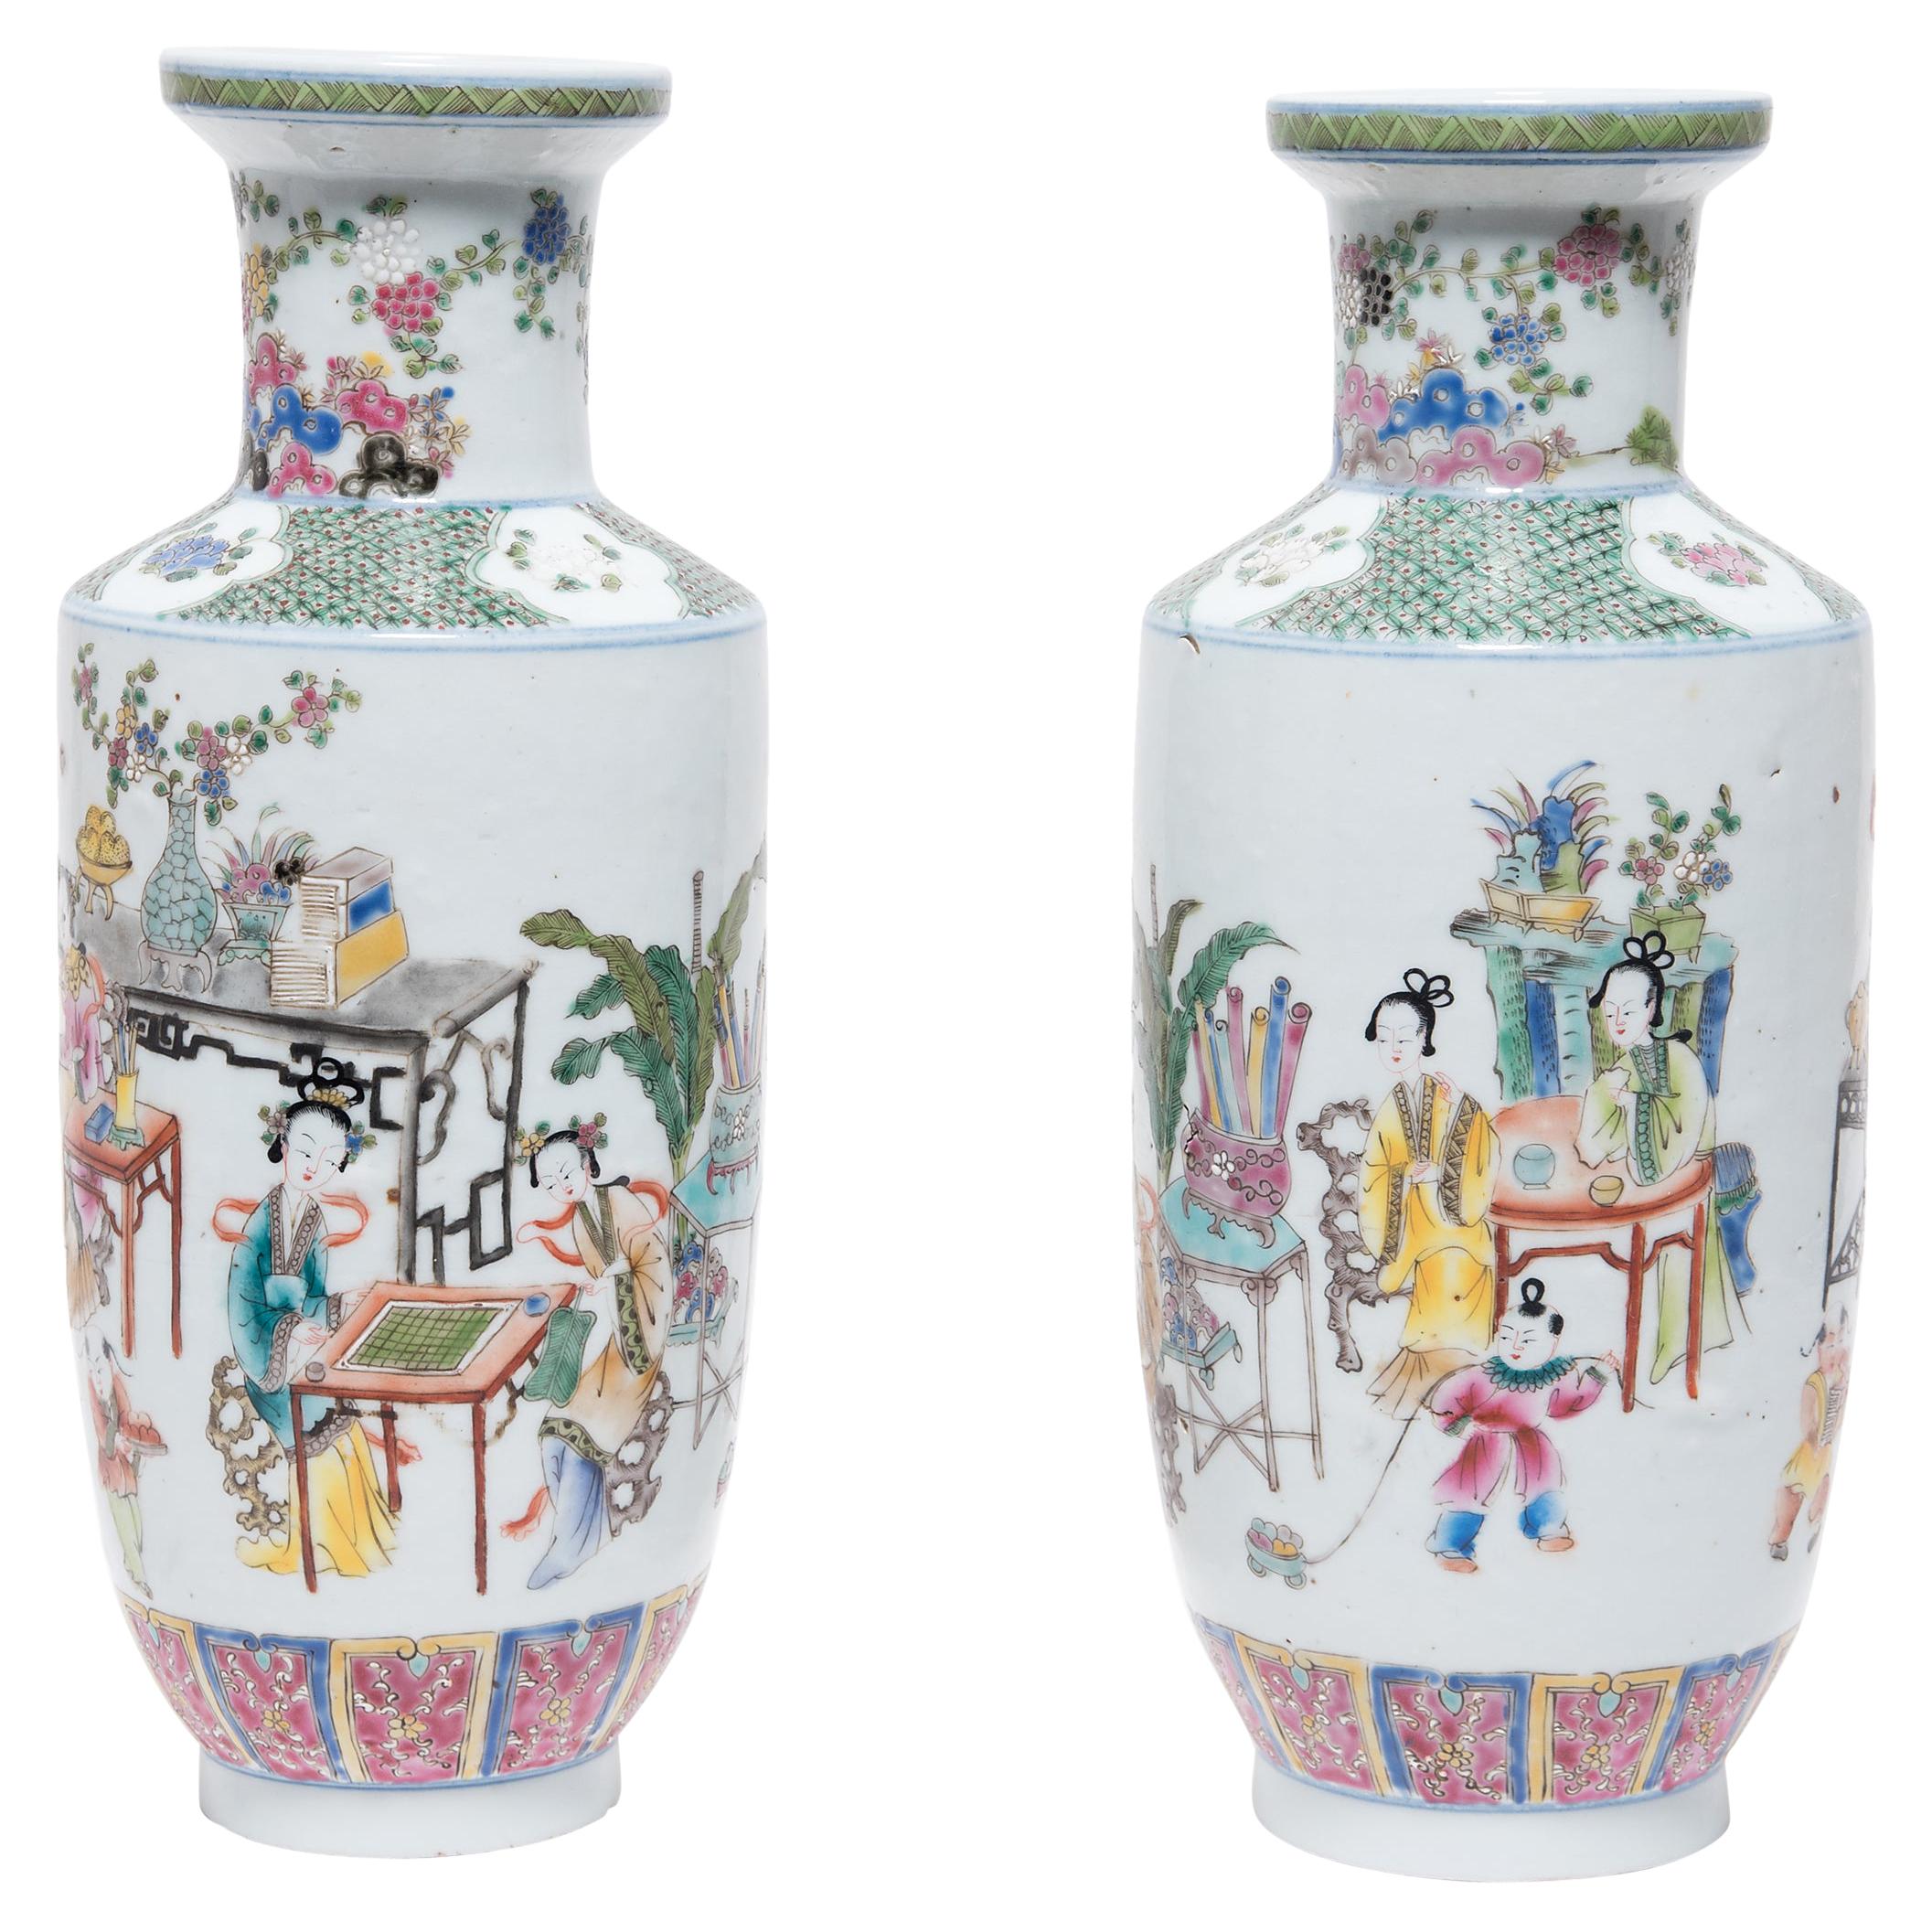 Pair of Chinese Famille Rose Rouleau Vases, c. 1900